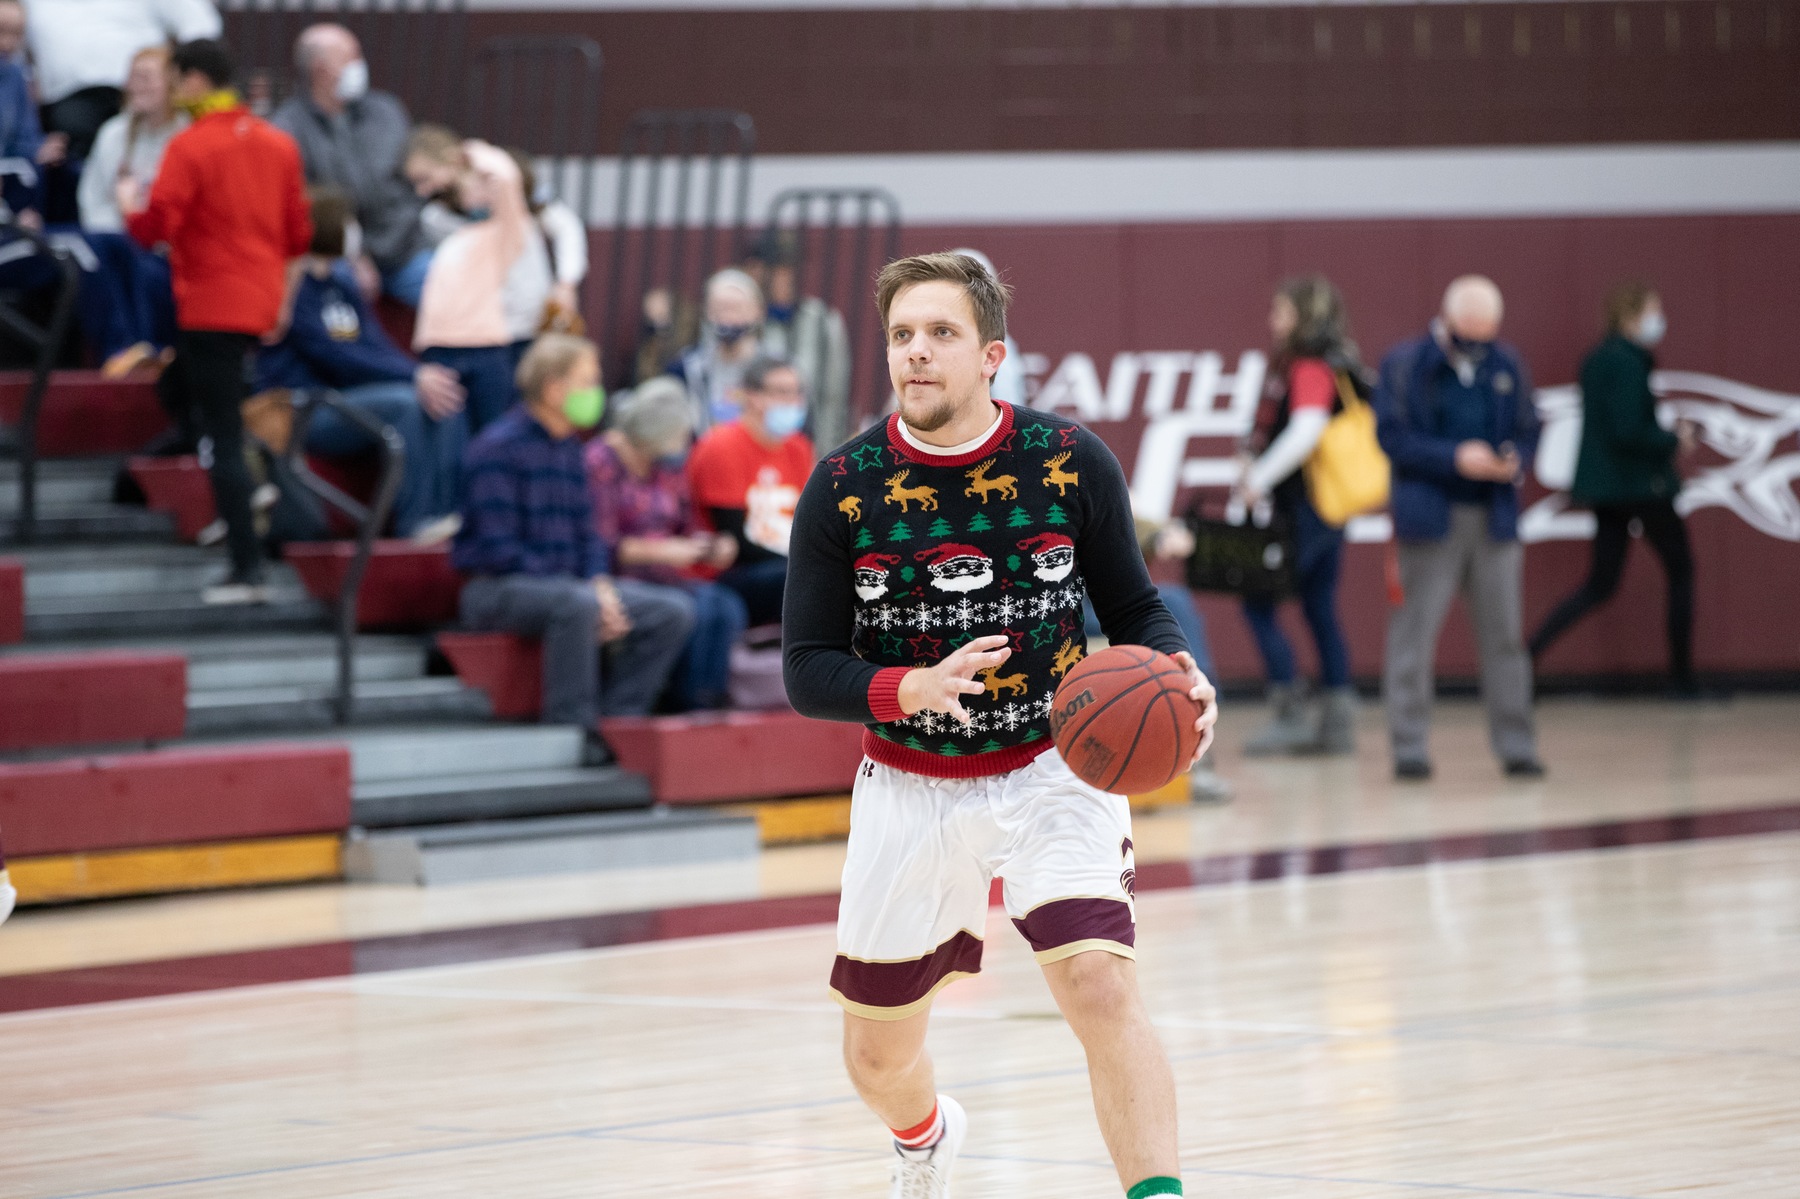 Jason Conable had his best game of the year on Ugly Christmas Sweater Night